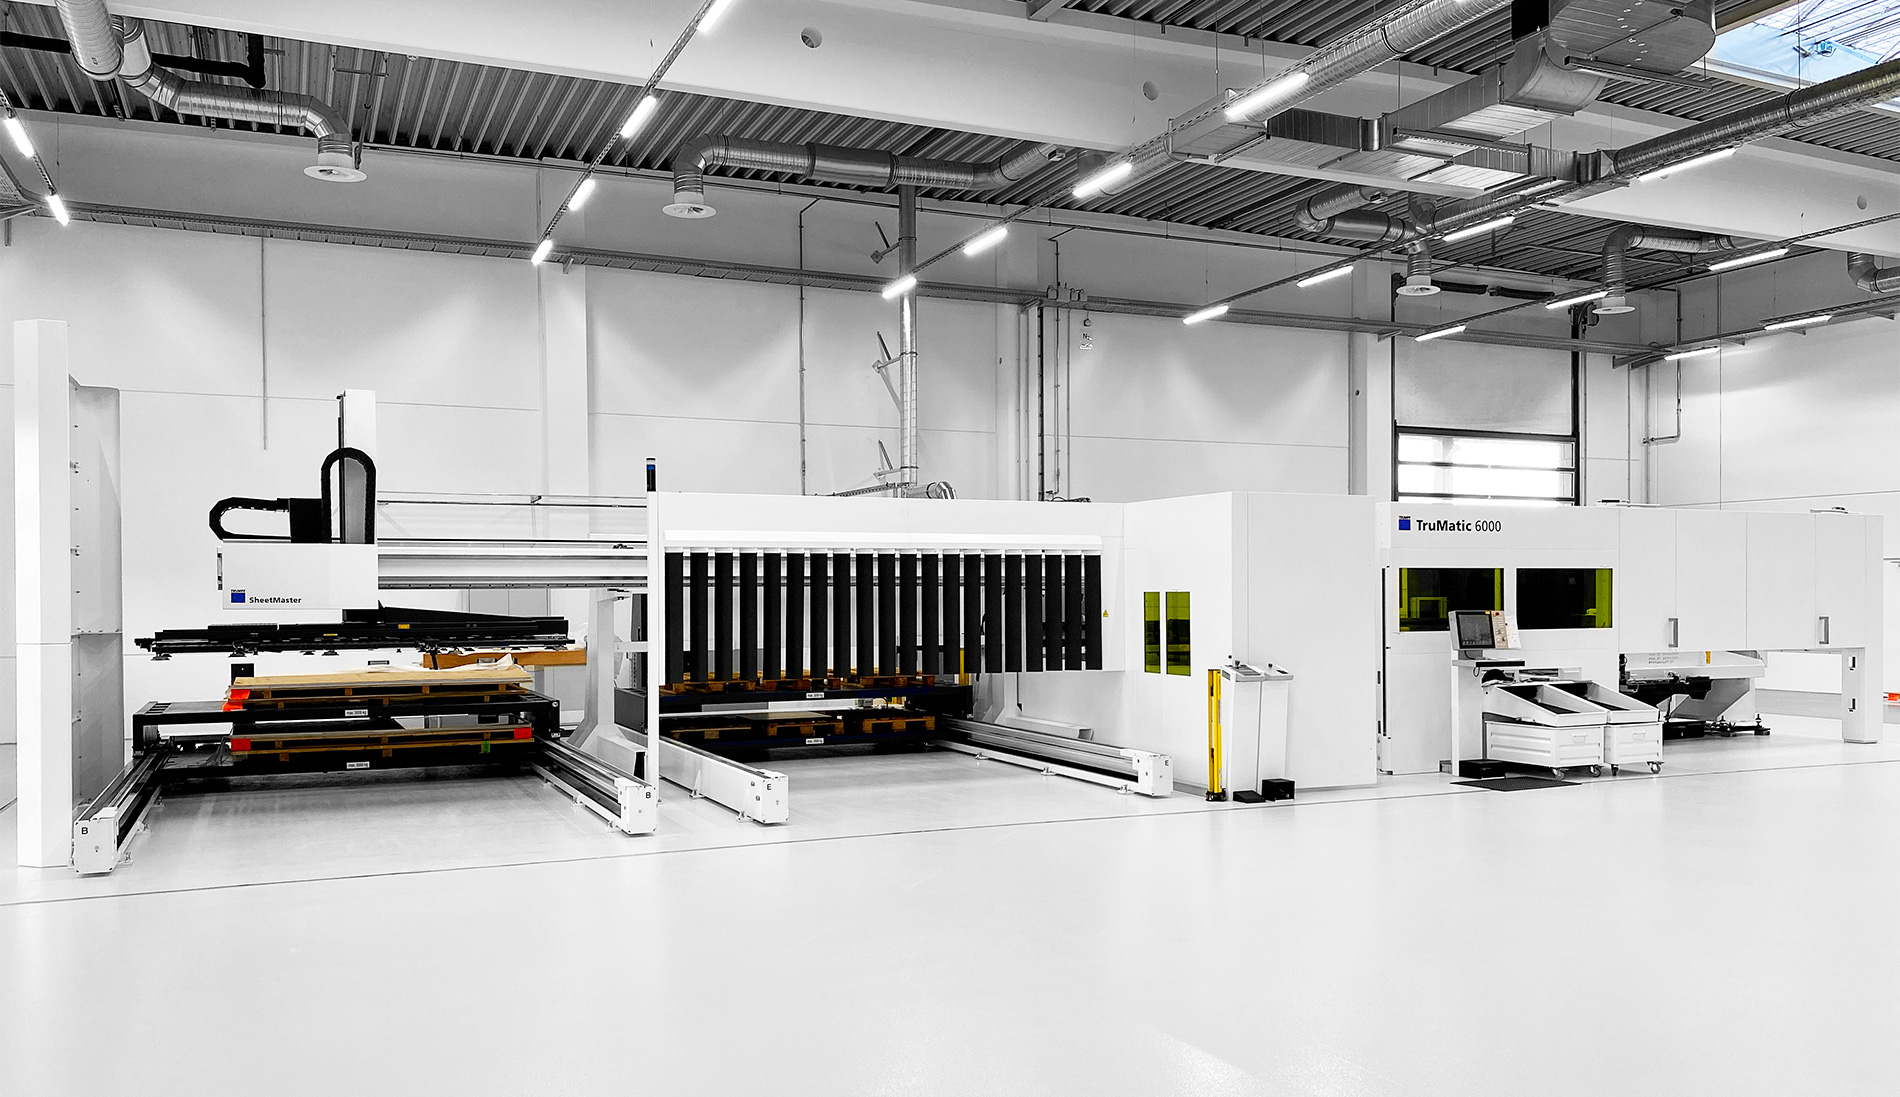 The new SKS production hall in Kaiserslautern